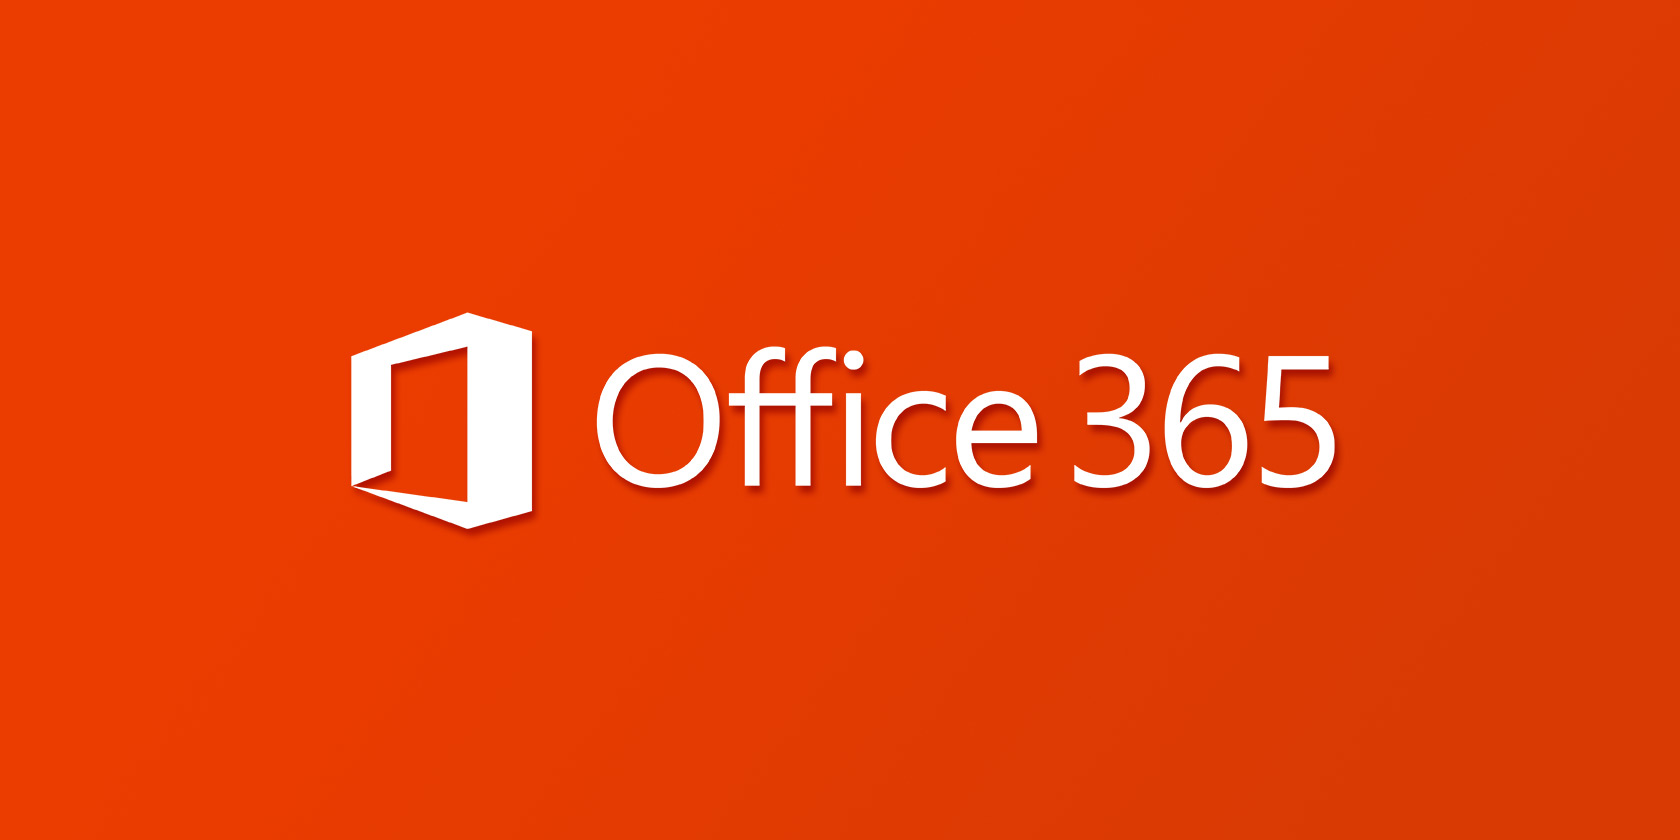 How to Cancel an Office 365 Subscription and Get a Refund | MALIKA KAROUM